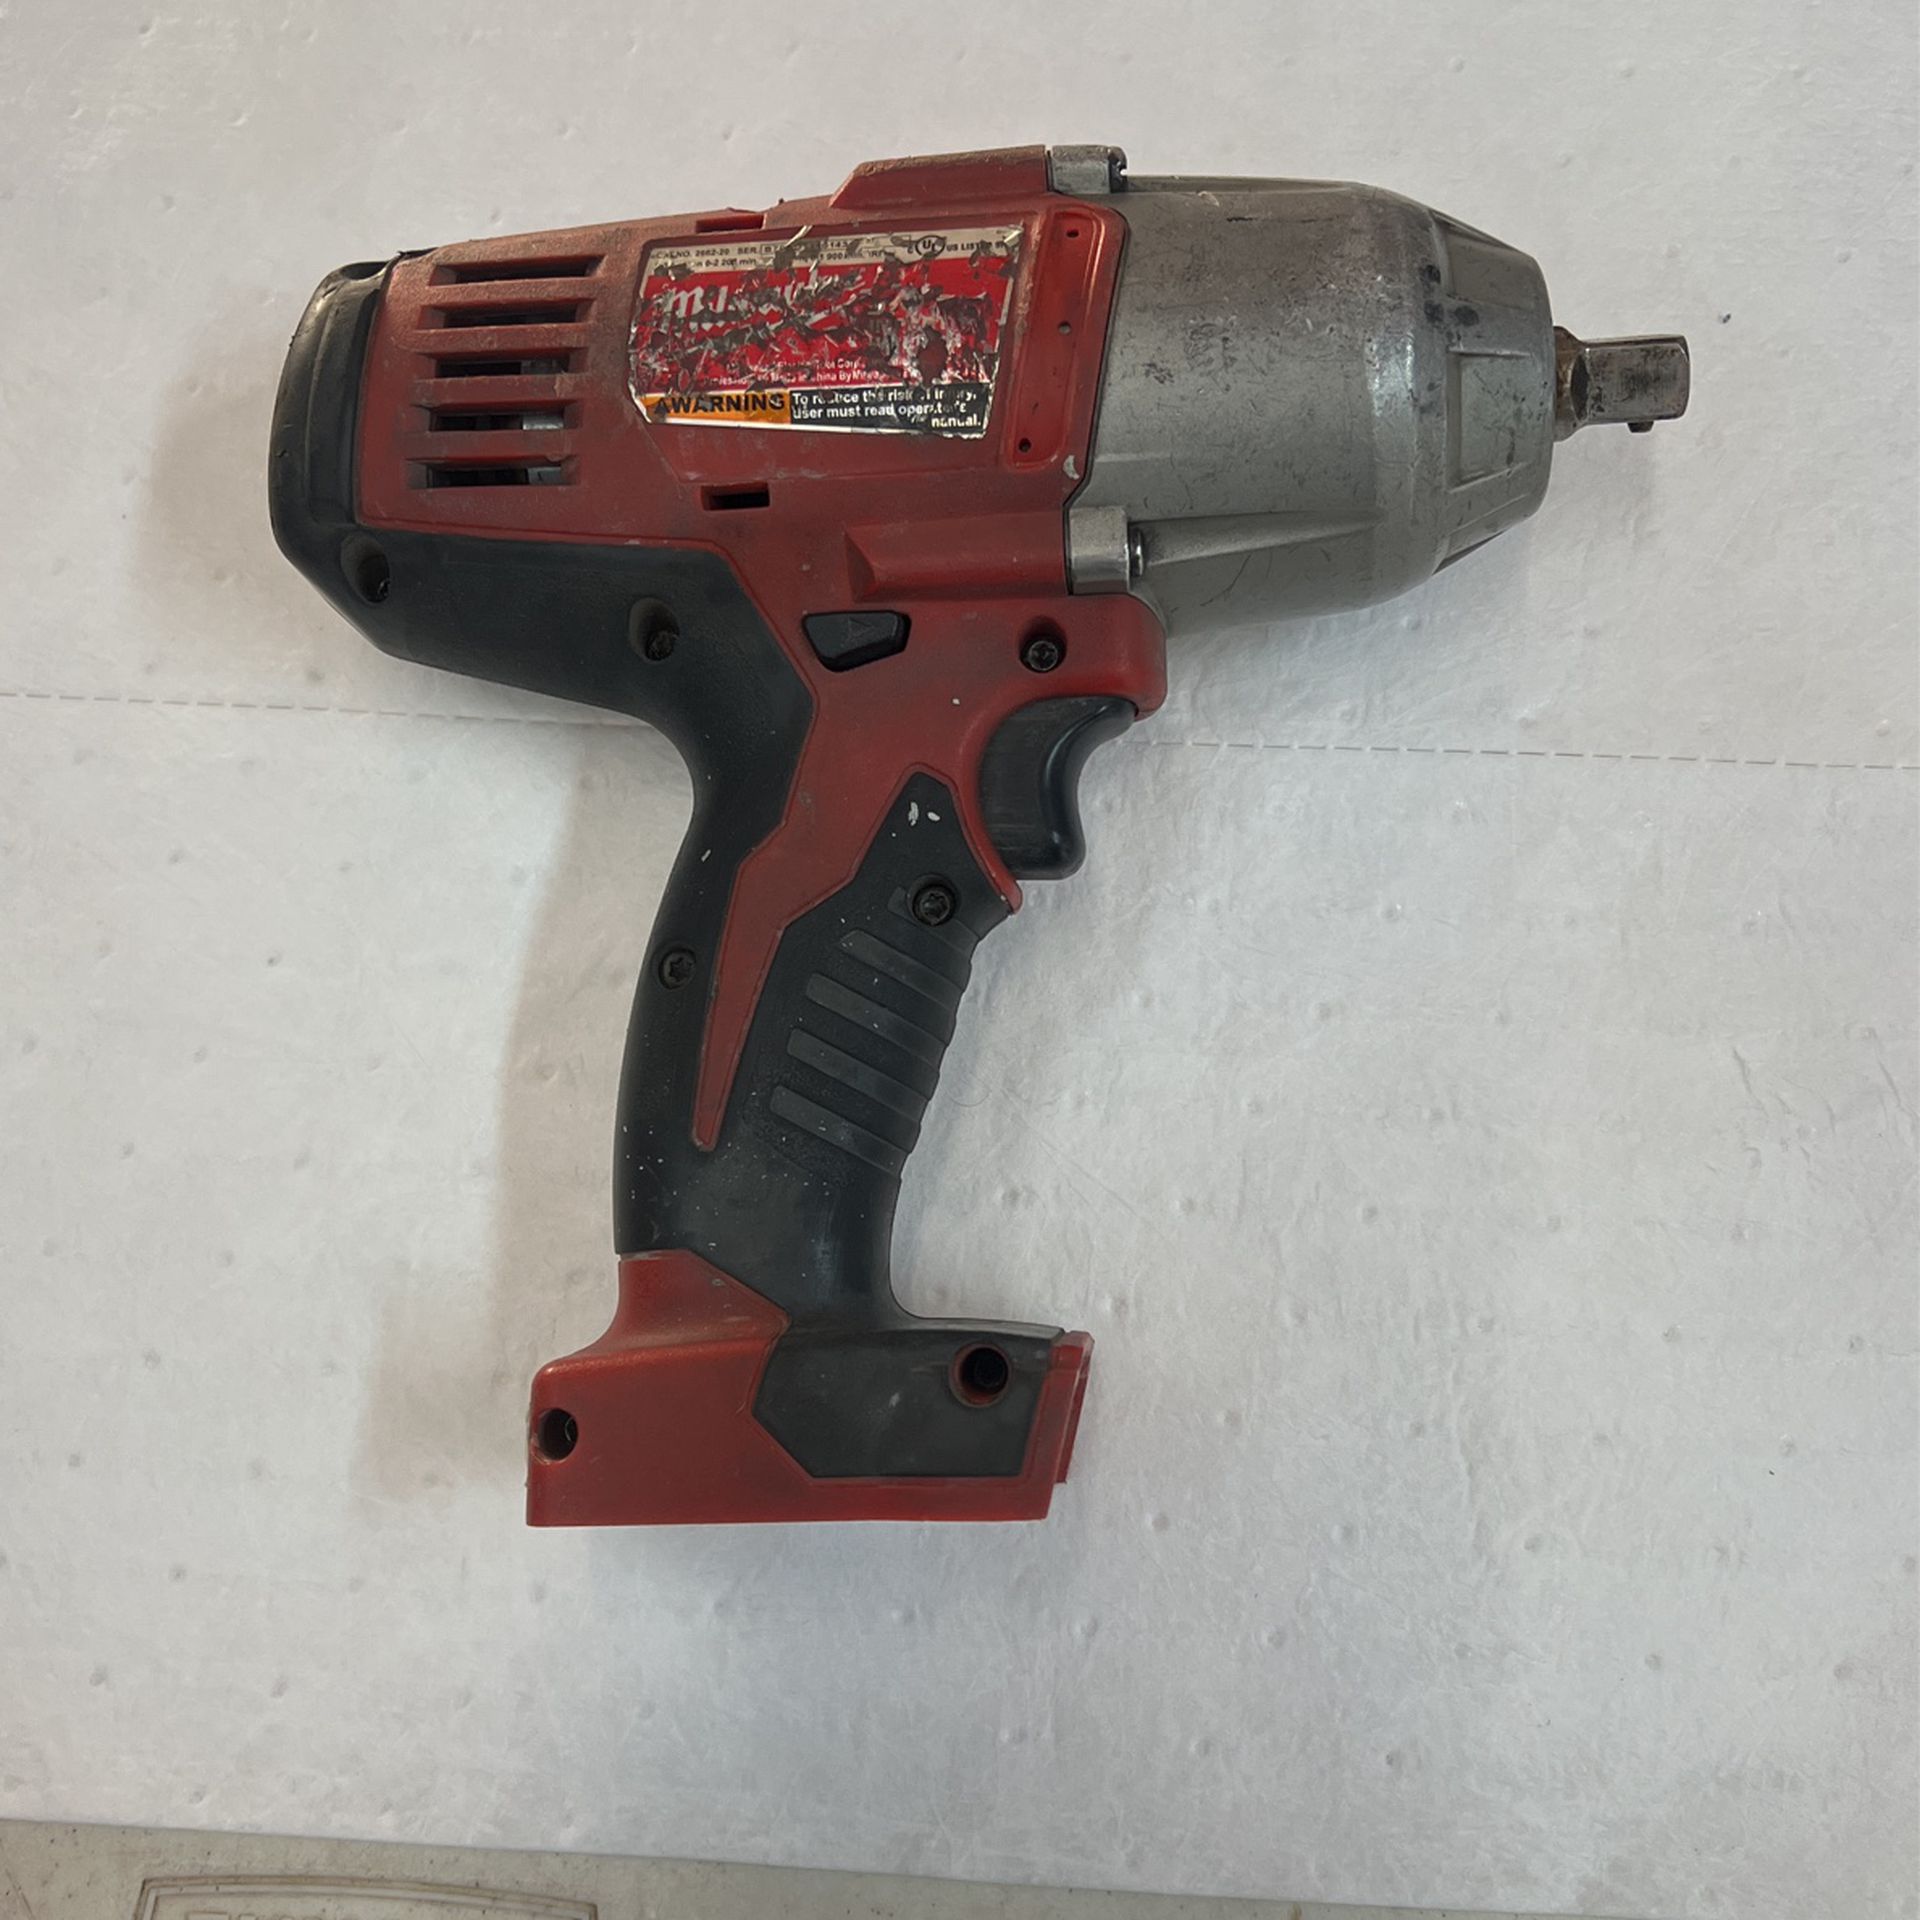 Milwaukee 2663-20 High Torque Cordless 1/2 Inch Impact Wrench